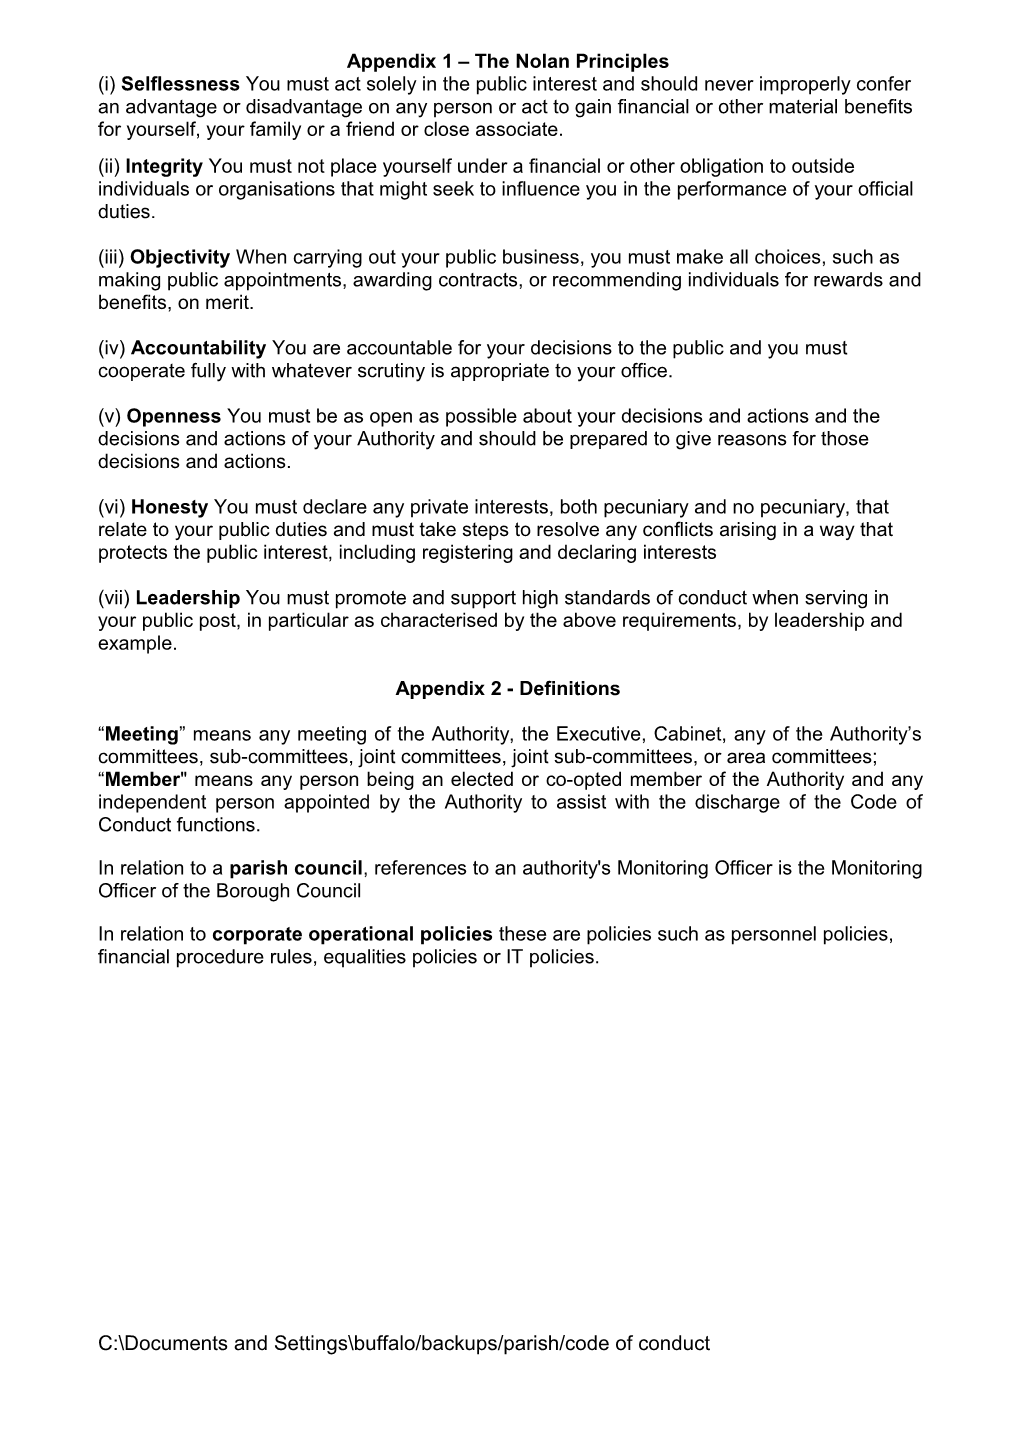 Code of Conduct of Hinckley and Bosworth Borough Council